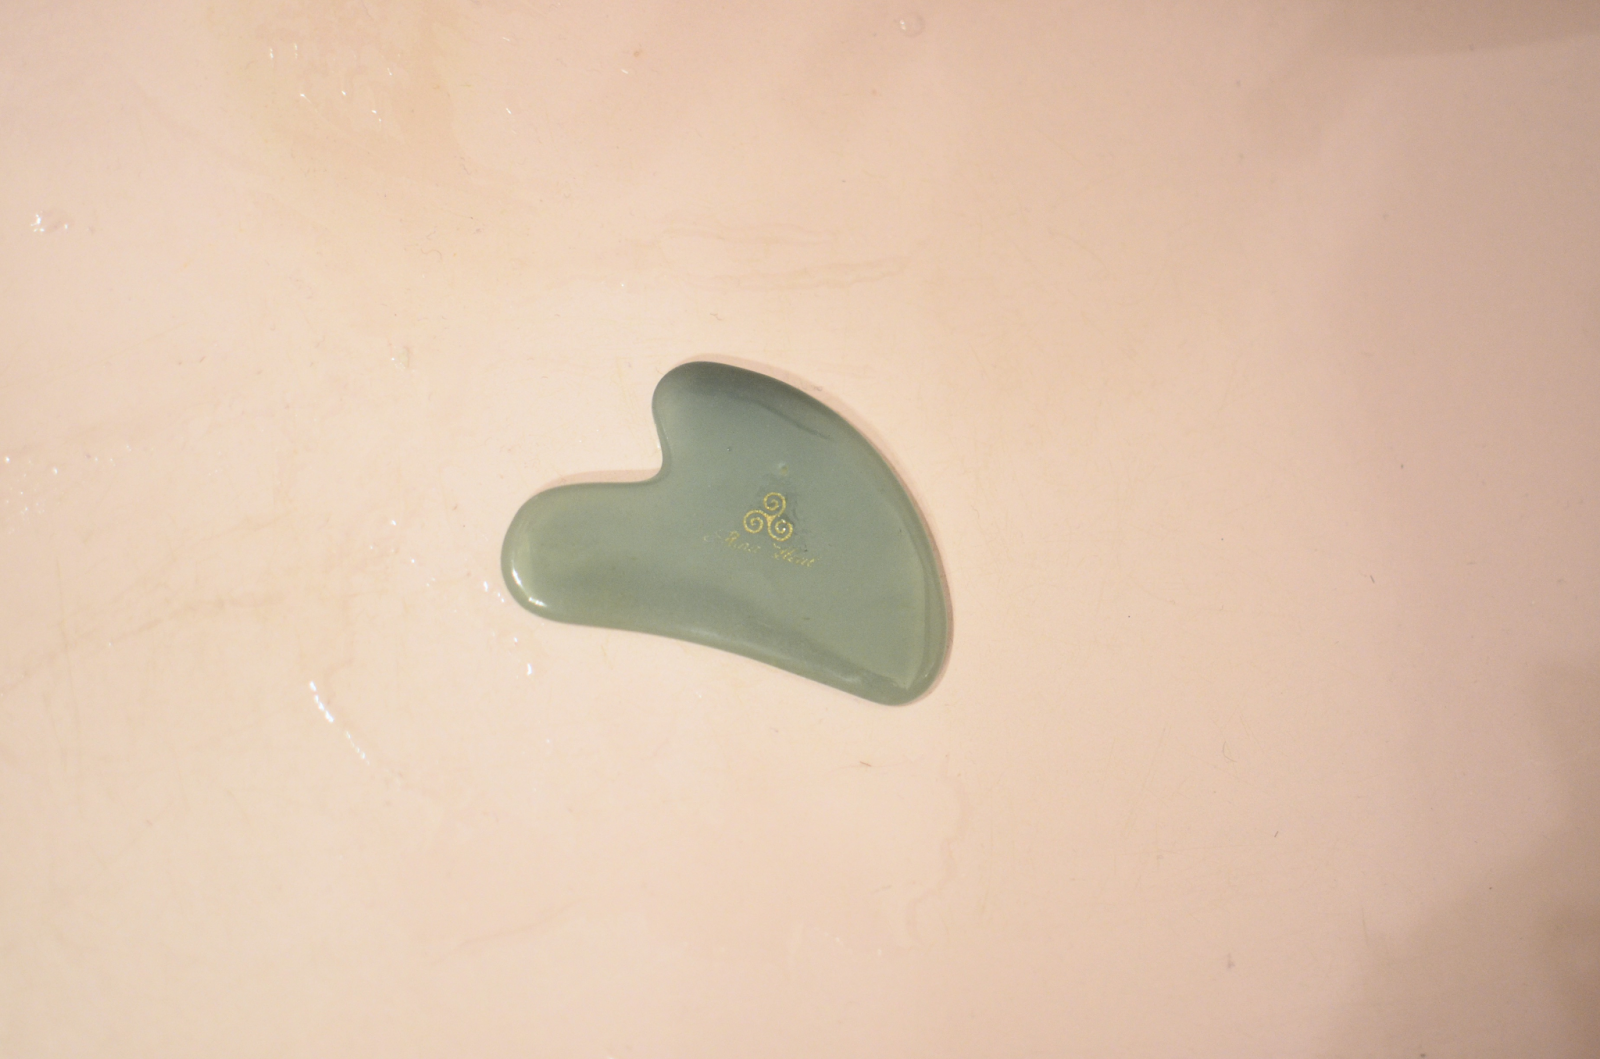 Gua Sha Tool: The ancient beauty secret for a youthful complexion!